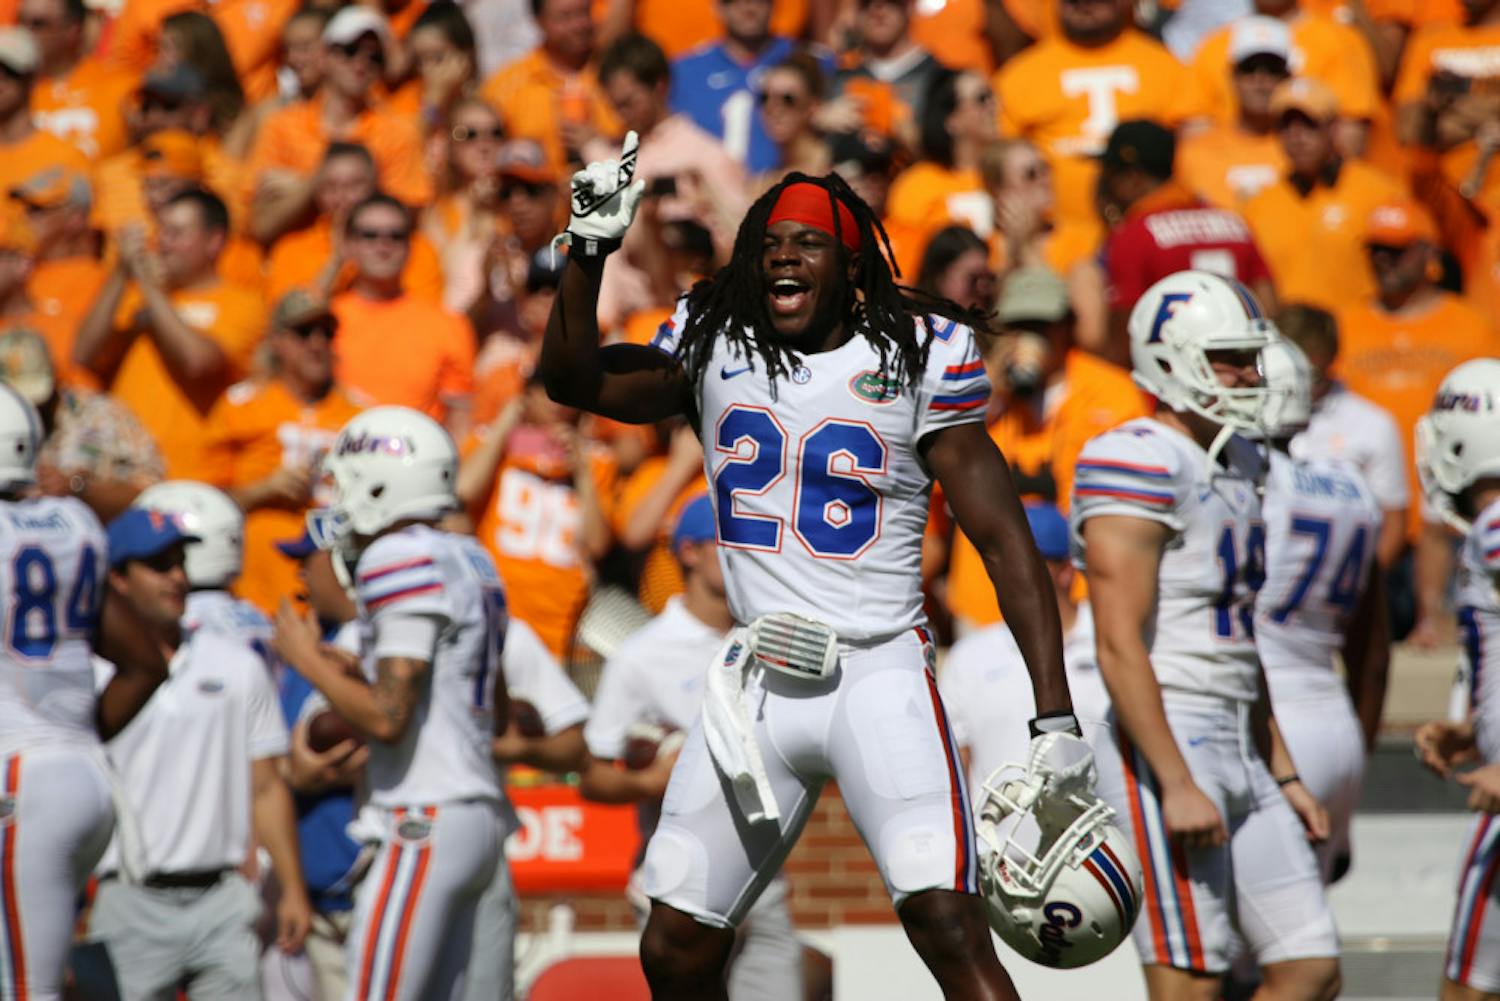 Marcell Harris celebrates during Florida's 38-28 loss against Tennessee on Sept. 24, 2016, at Neyland Stadium.